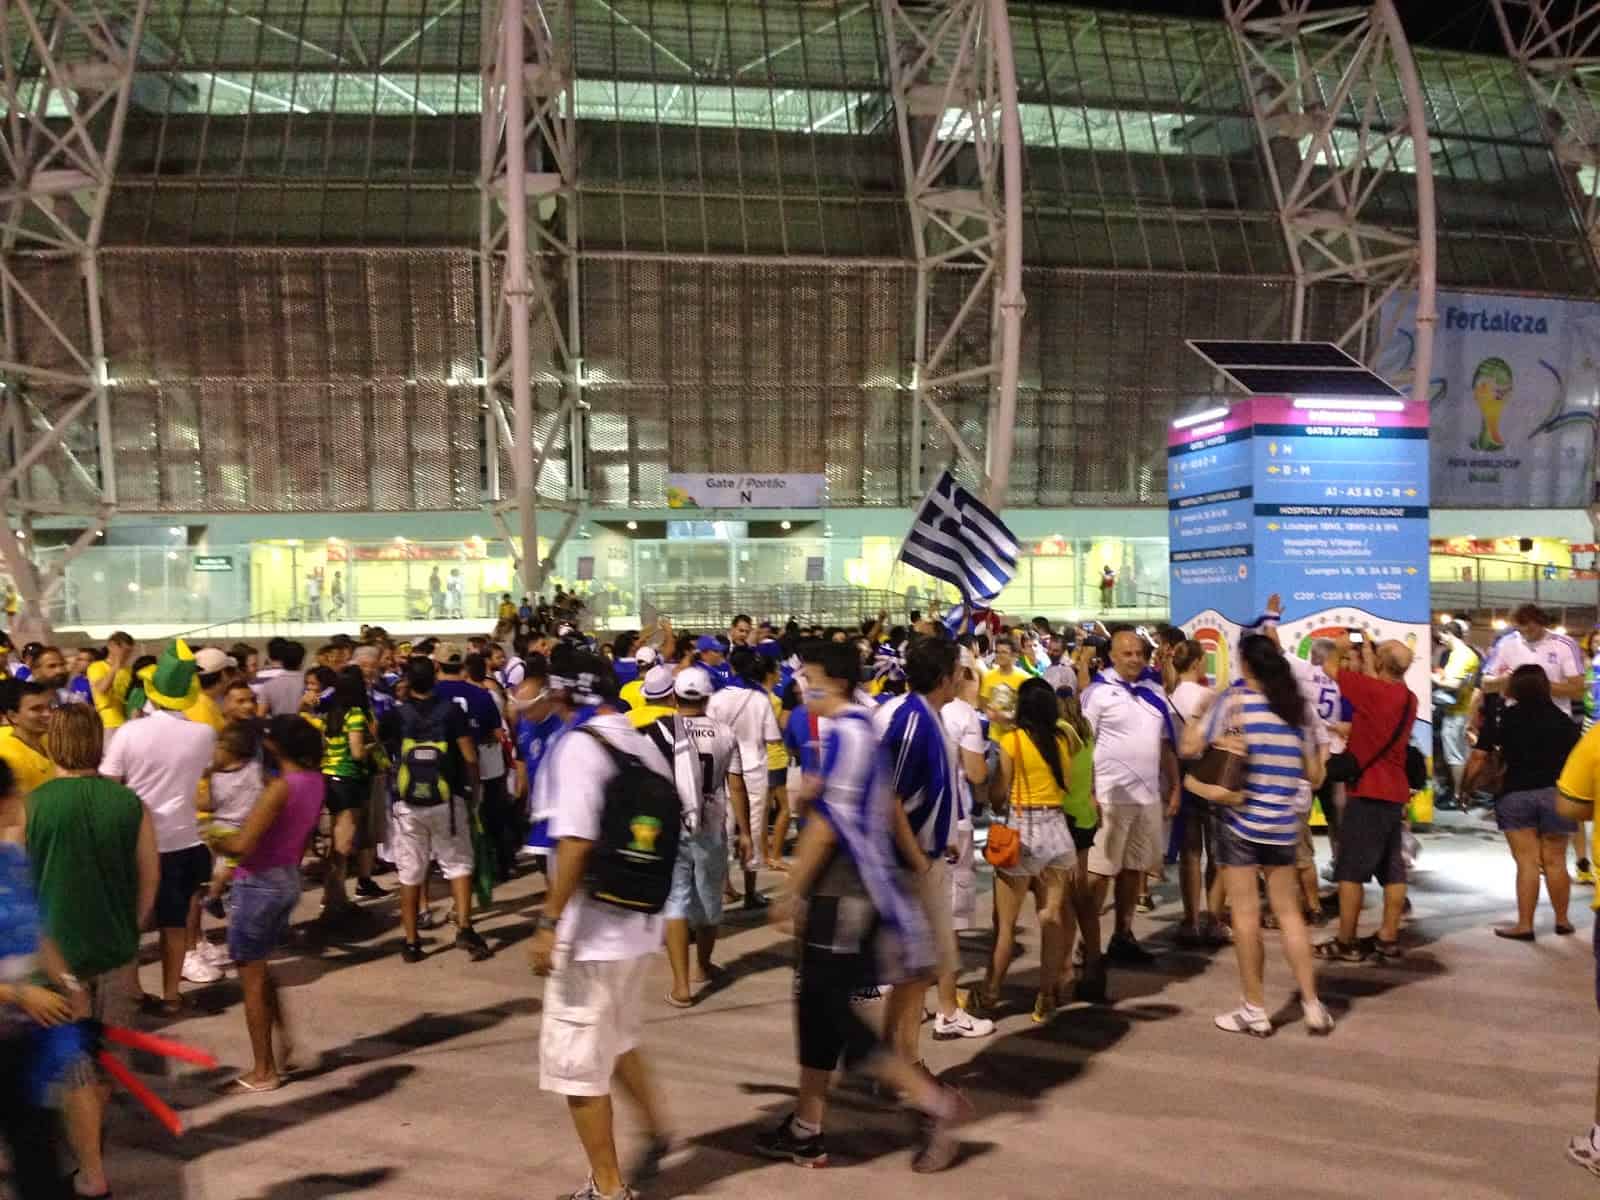 Outside the stadium after the game at the Greece vs Côte d'Ivoire game in the 2014 World Cup at Arena Castelão in Fortaleza, Brazil